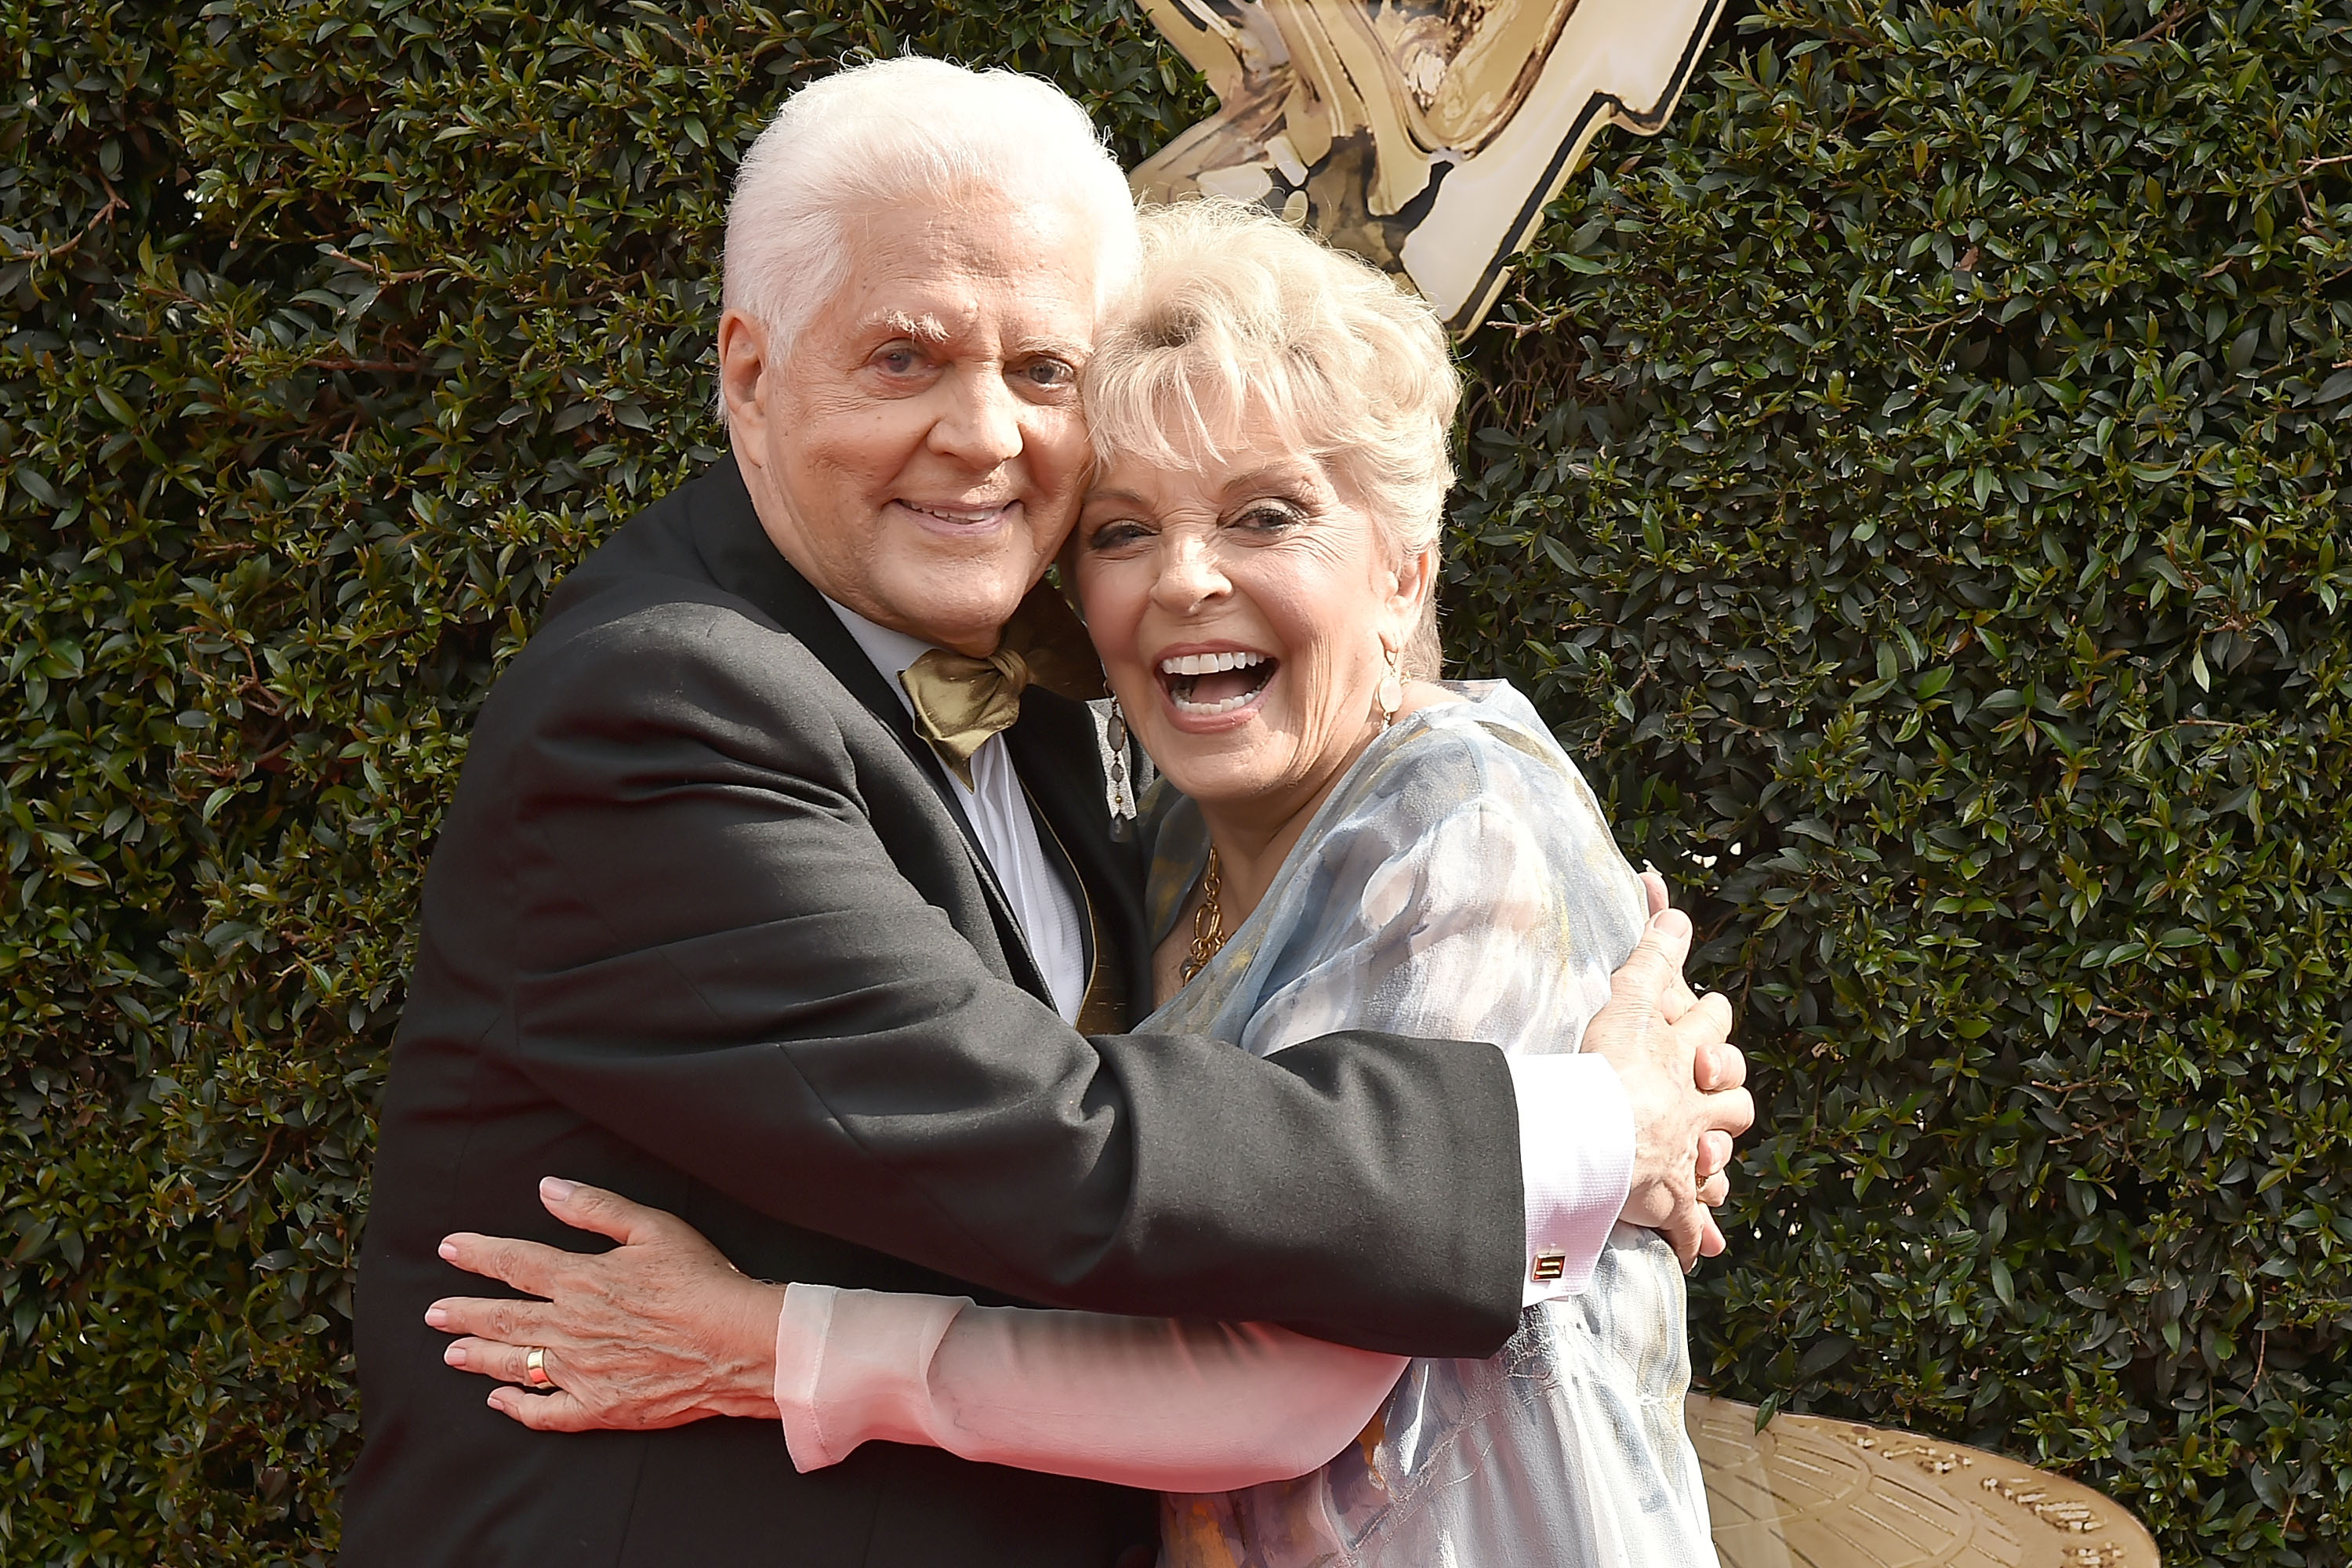 Bill Hayes and Susan Seaforth Hayes at the 2018 Daytime Emmy Awards Arrivals at Pasadena Civic Auditorium on April 29, 2018 in Pasadena, California | Source: Getty Images